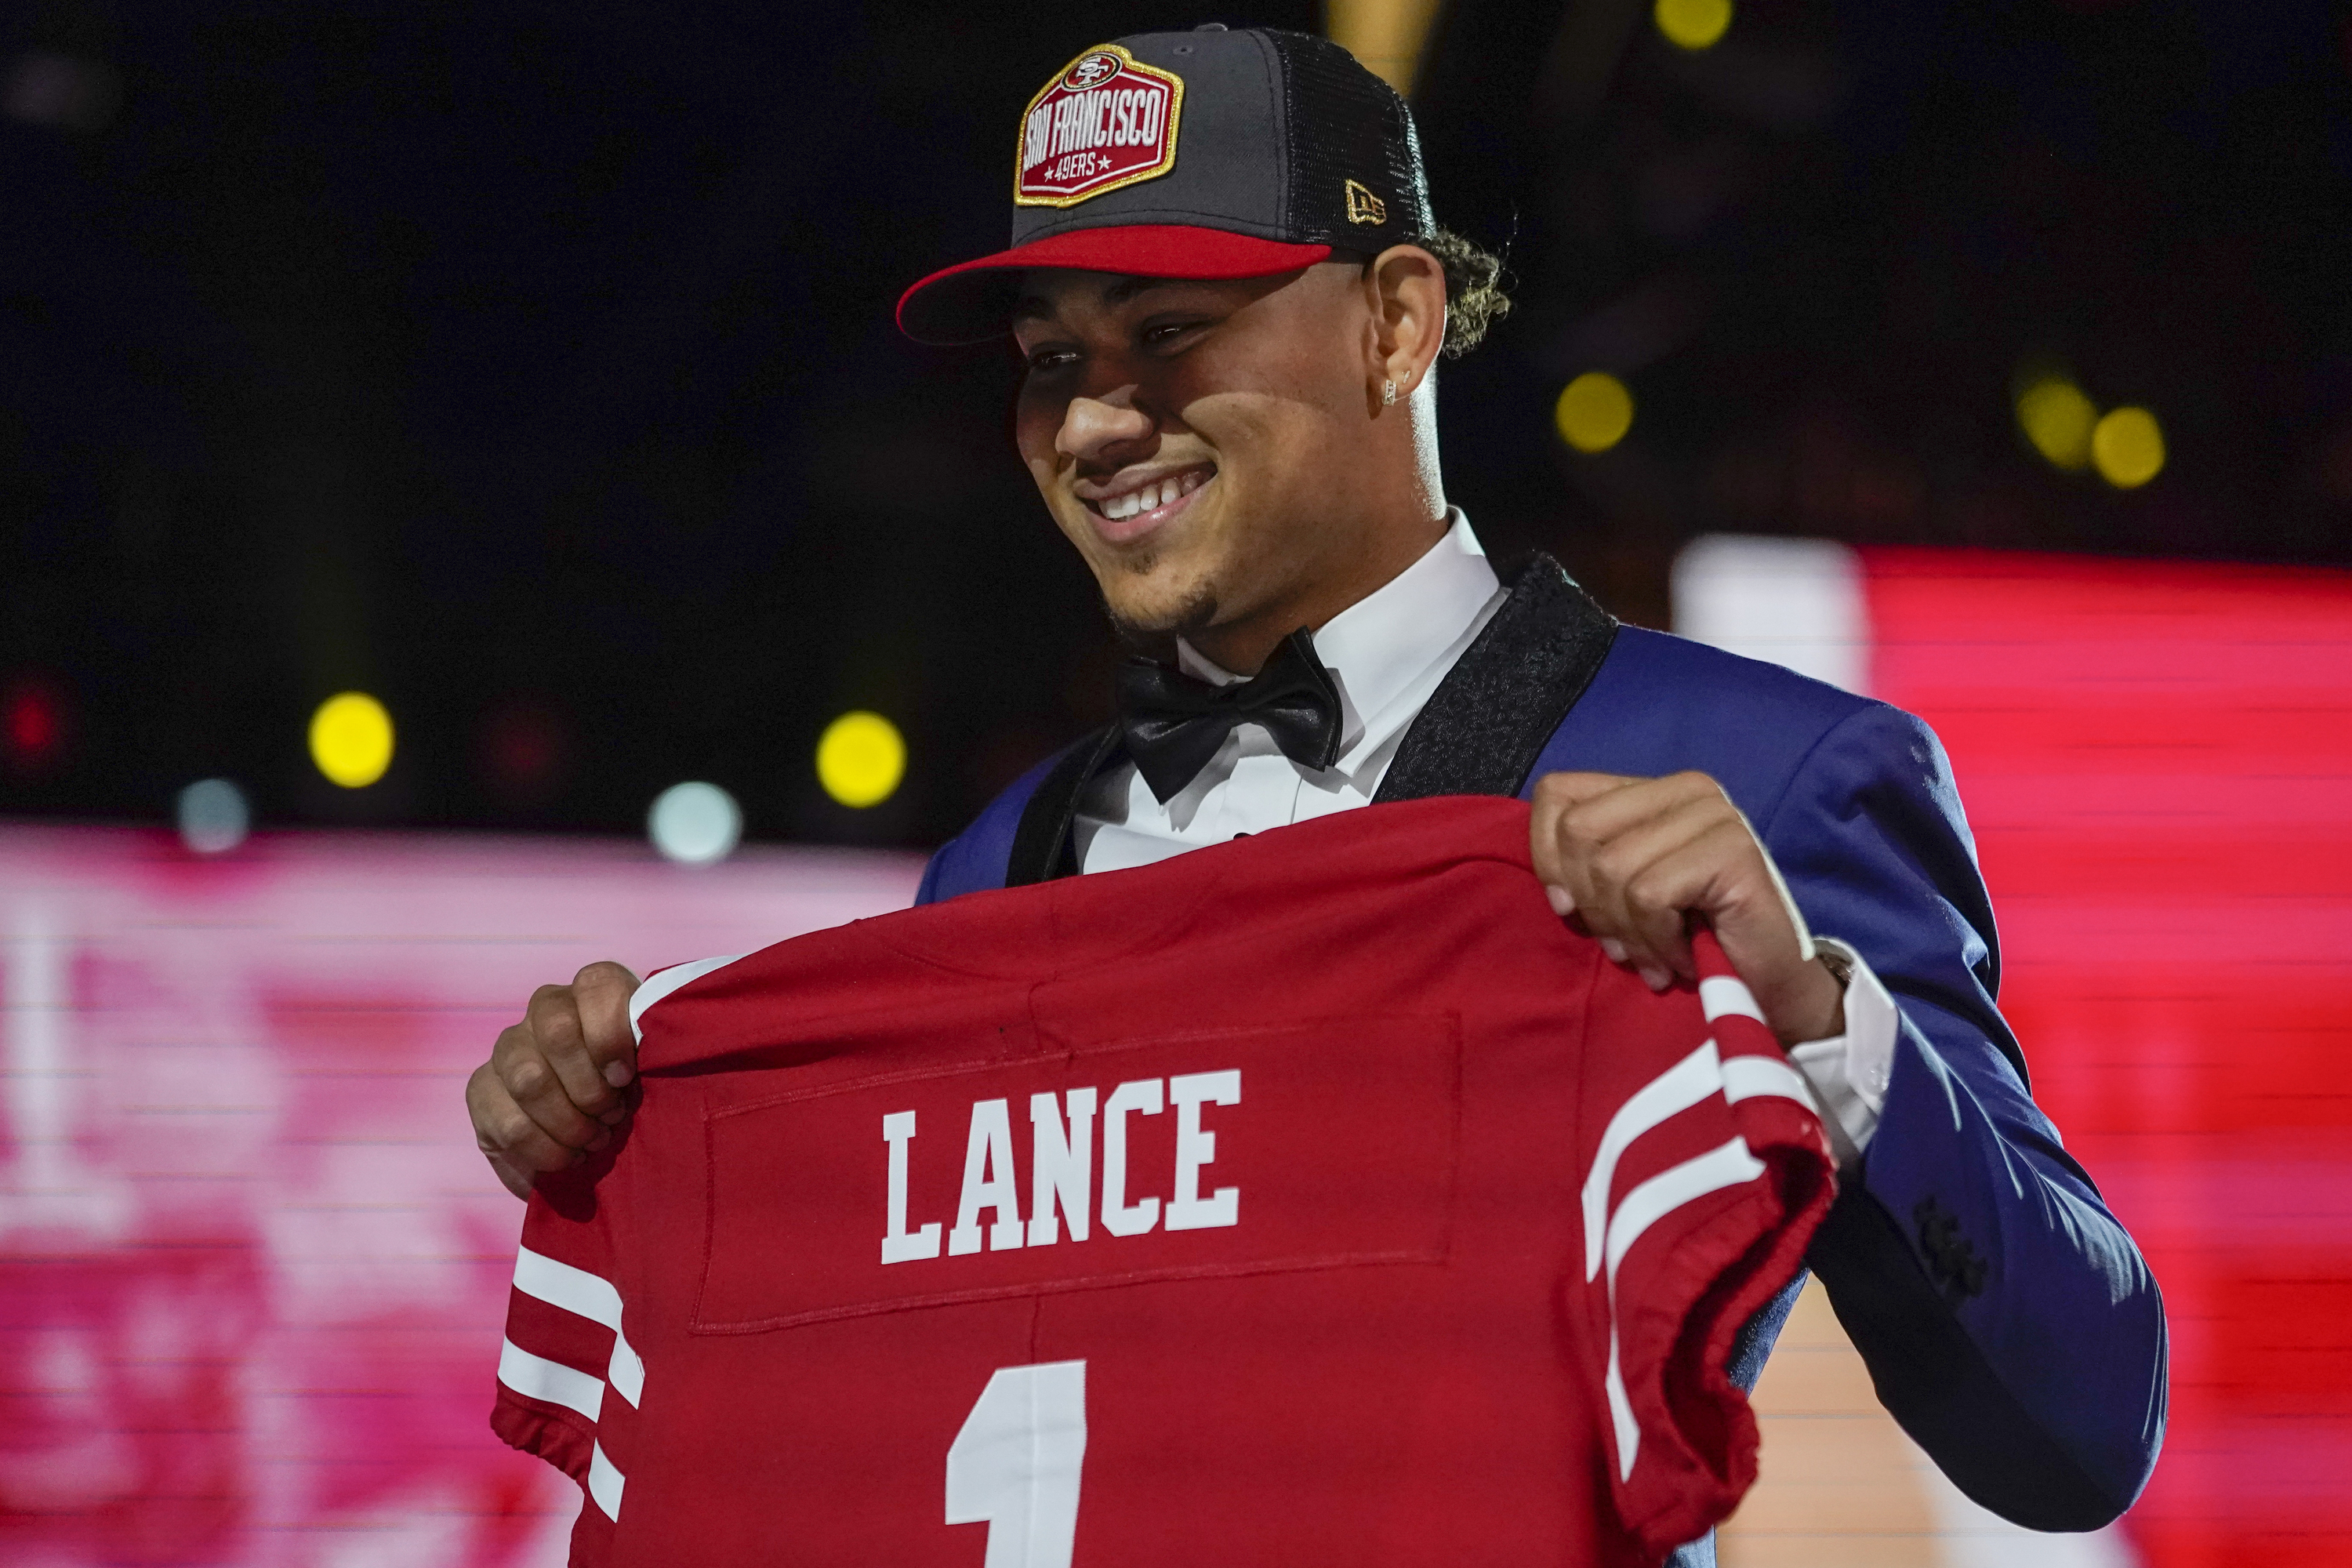 49ers Select Trey Lance with the 3rd pick in the 2021 NFL Draft